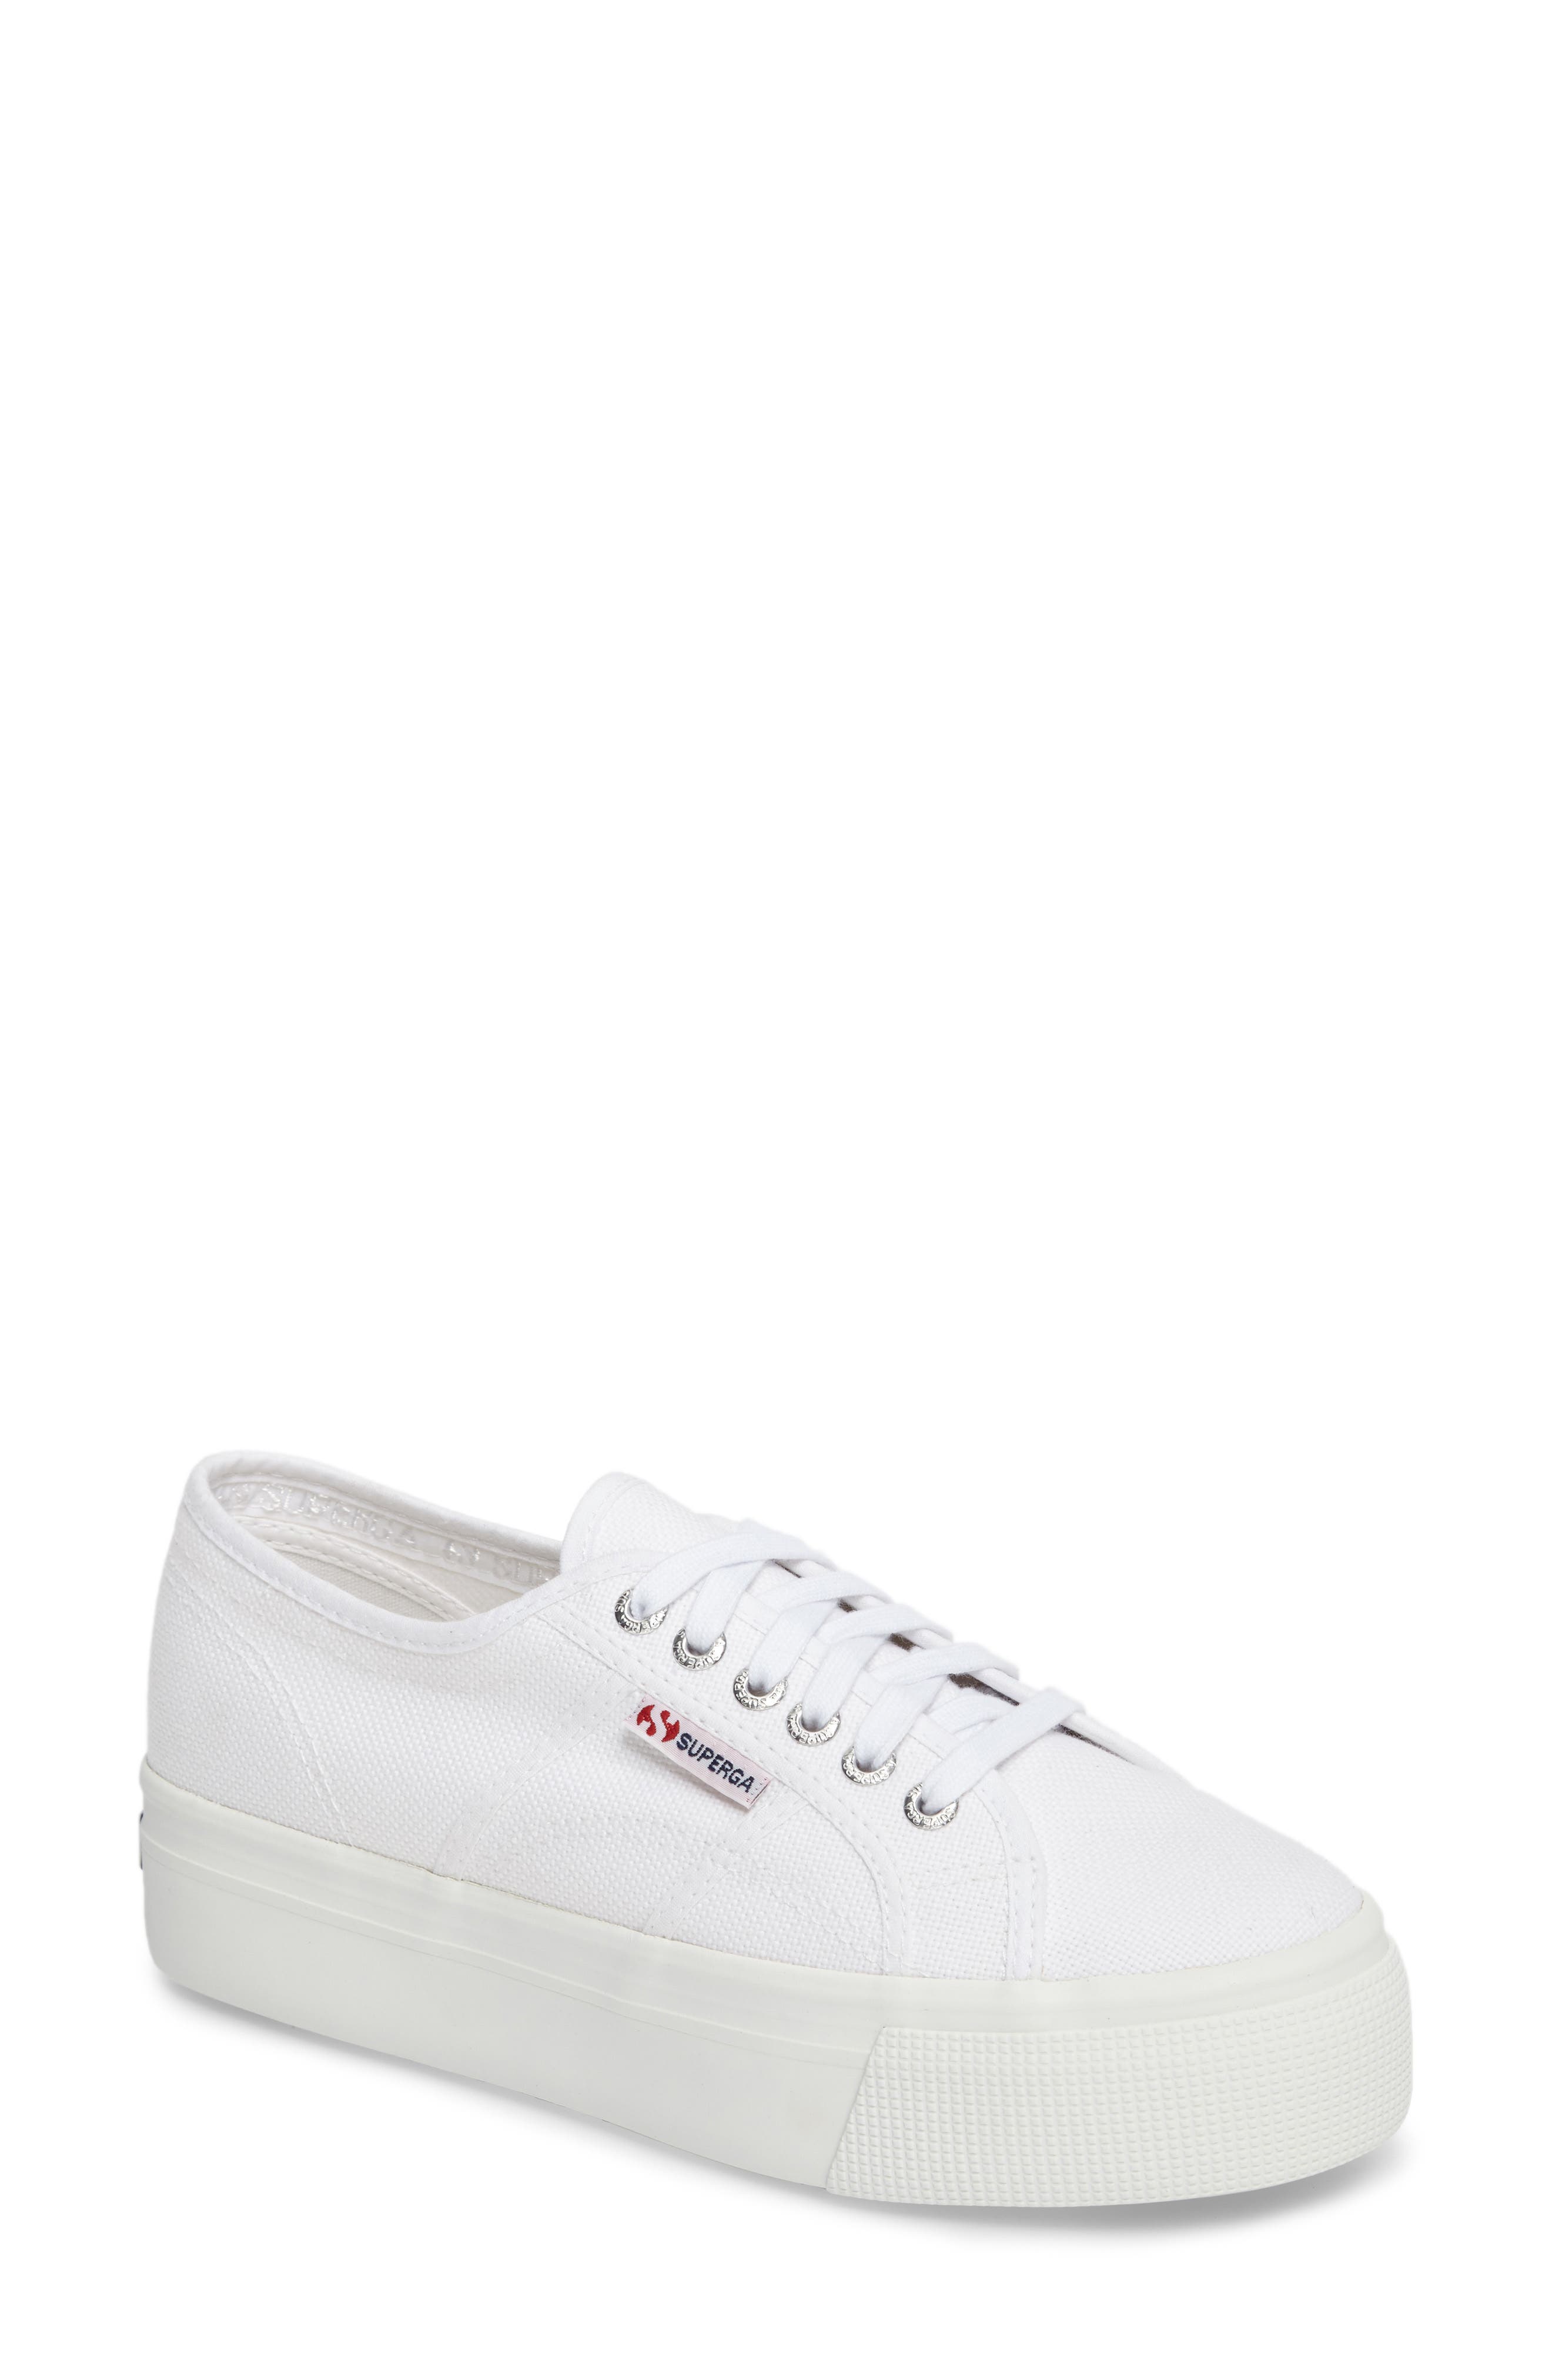 Womens Superga 2820 COTW Platform Wedge Fashion Lace Up Sneakers 